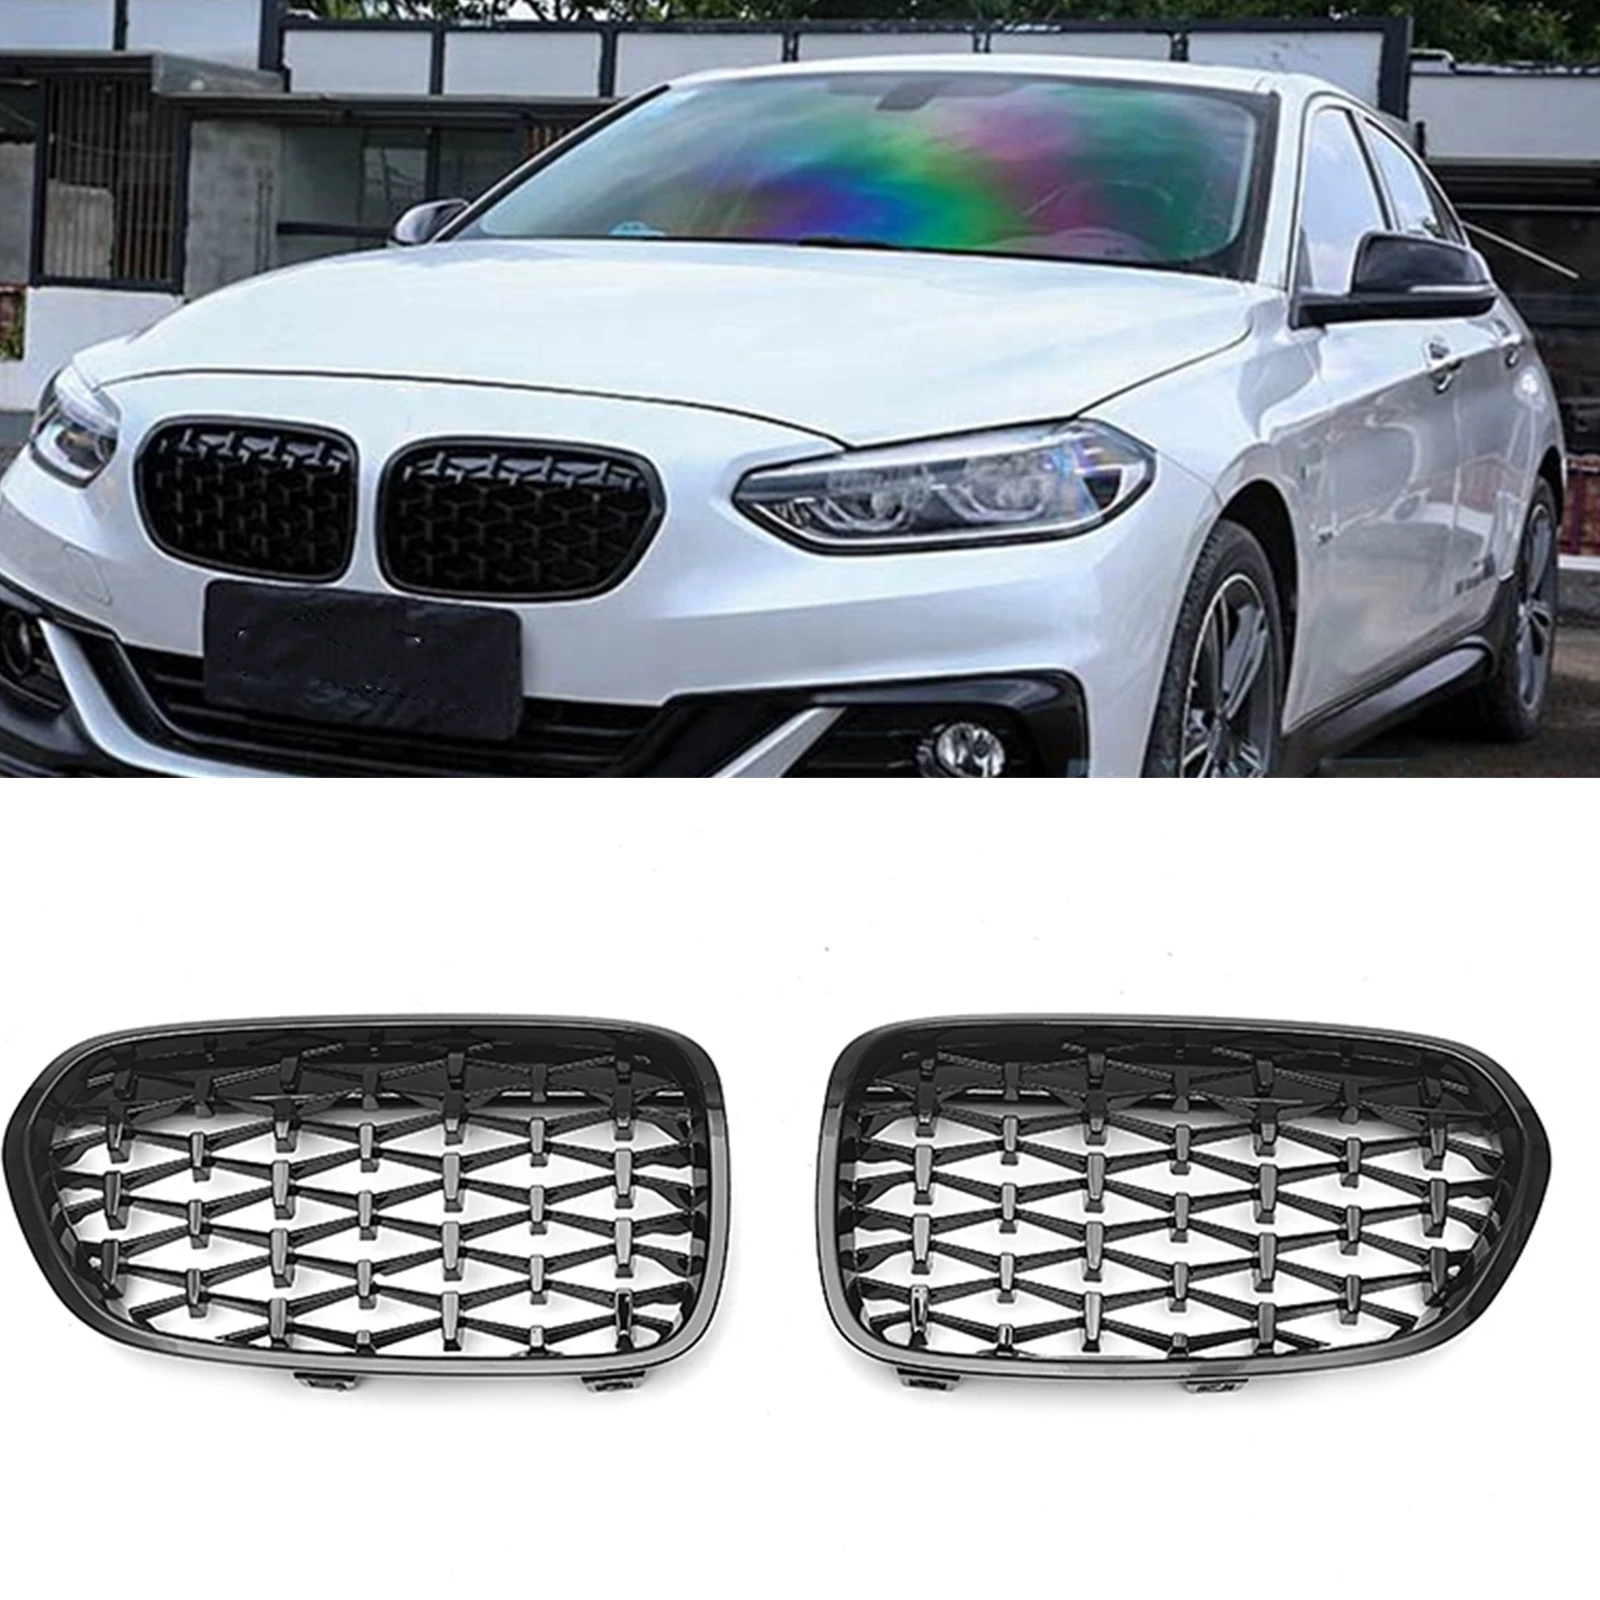 

Front Kidney Grille For BMW 1 Series F52 118i 120i 2018-2021 All Black Diamond Style Car Upper Bumper Hood Cover Mesh Grid Grill